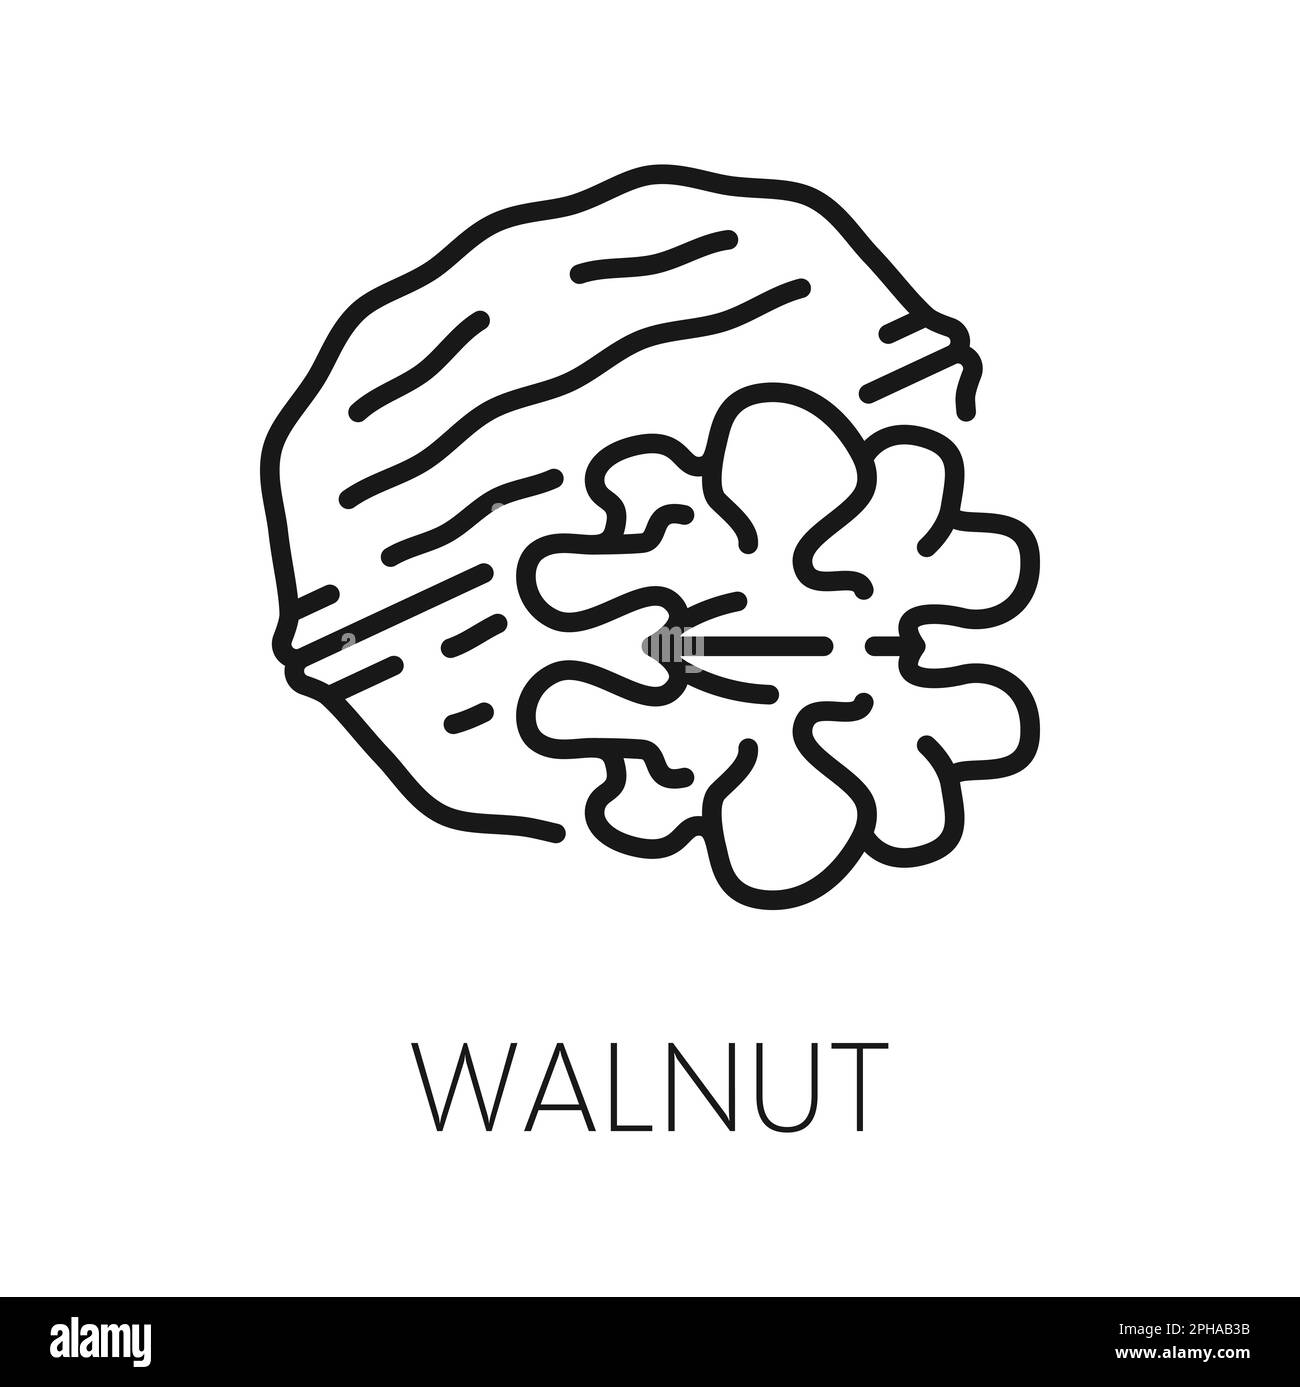 Walnut in shell, whole fruit in husky hardshell isolated outline icon. Vector walnut edible seed of drupe, nutrition organic food, vegetarian superfoo Stock Vector